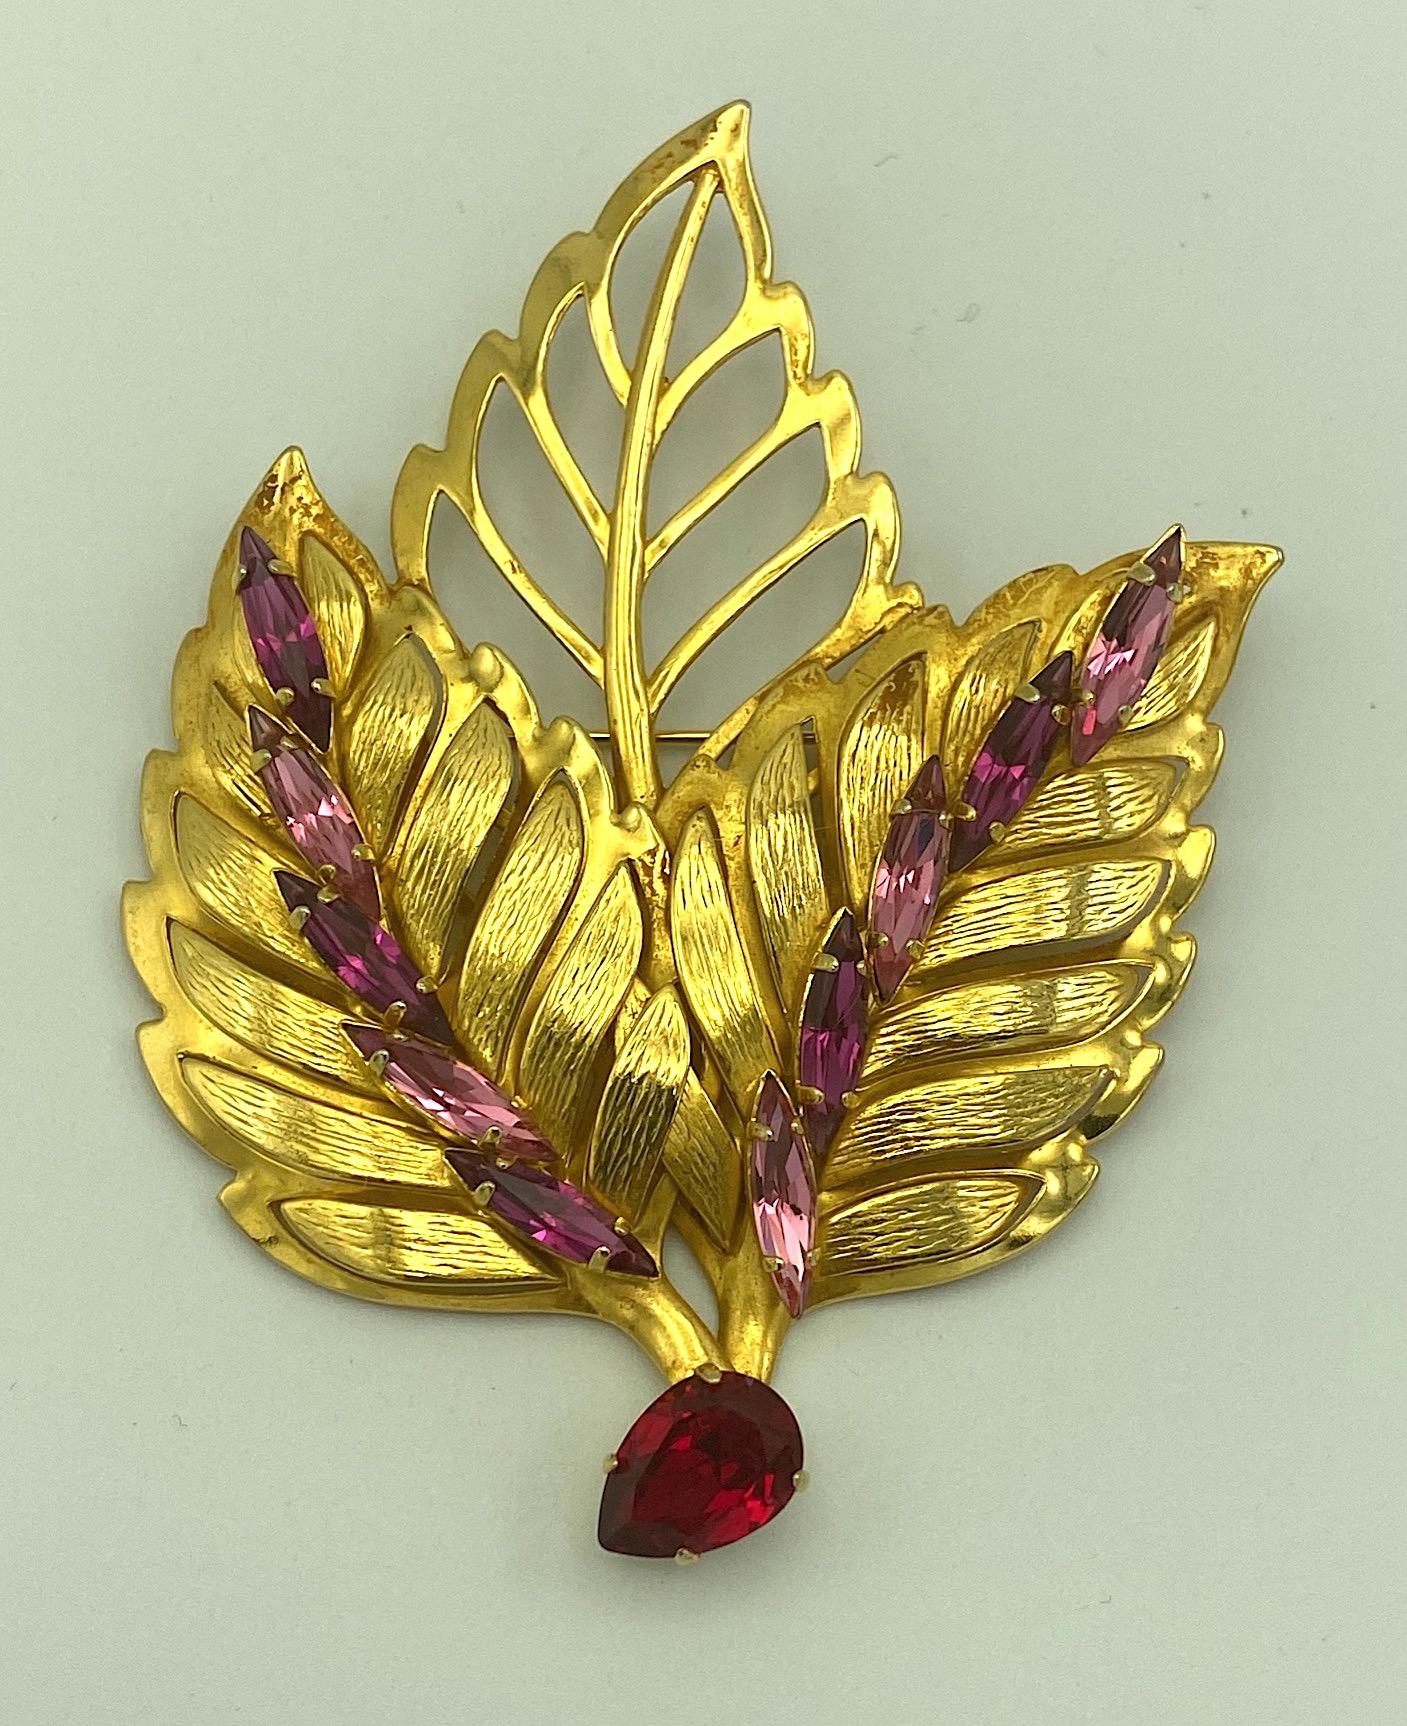 A beautiful triple leaf brooch from the 1980s by French fashion jewelry designer Philippe Ferrandis. The pieces is comprised of large leaves in textured and smooth 18K gold plate. The back leaf has cut out veining leaving open spaces. The front two